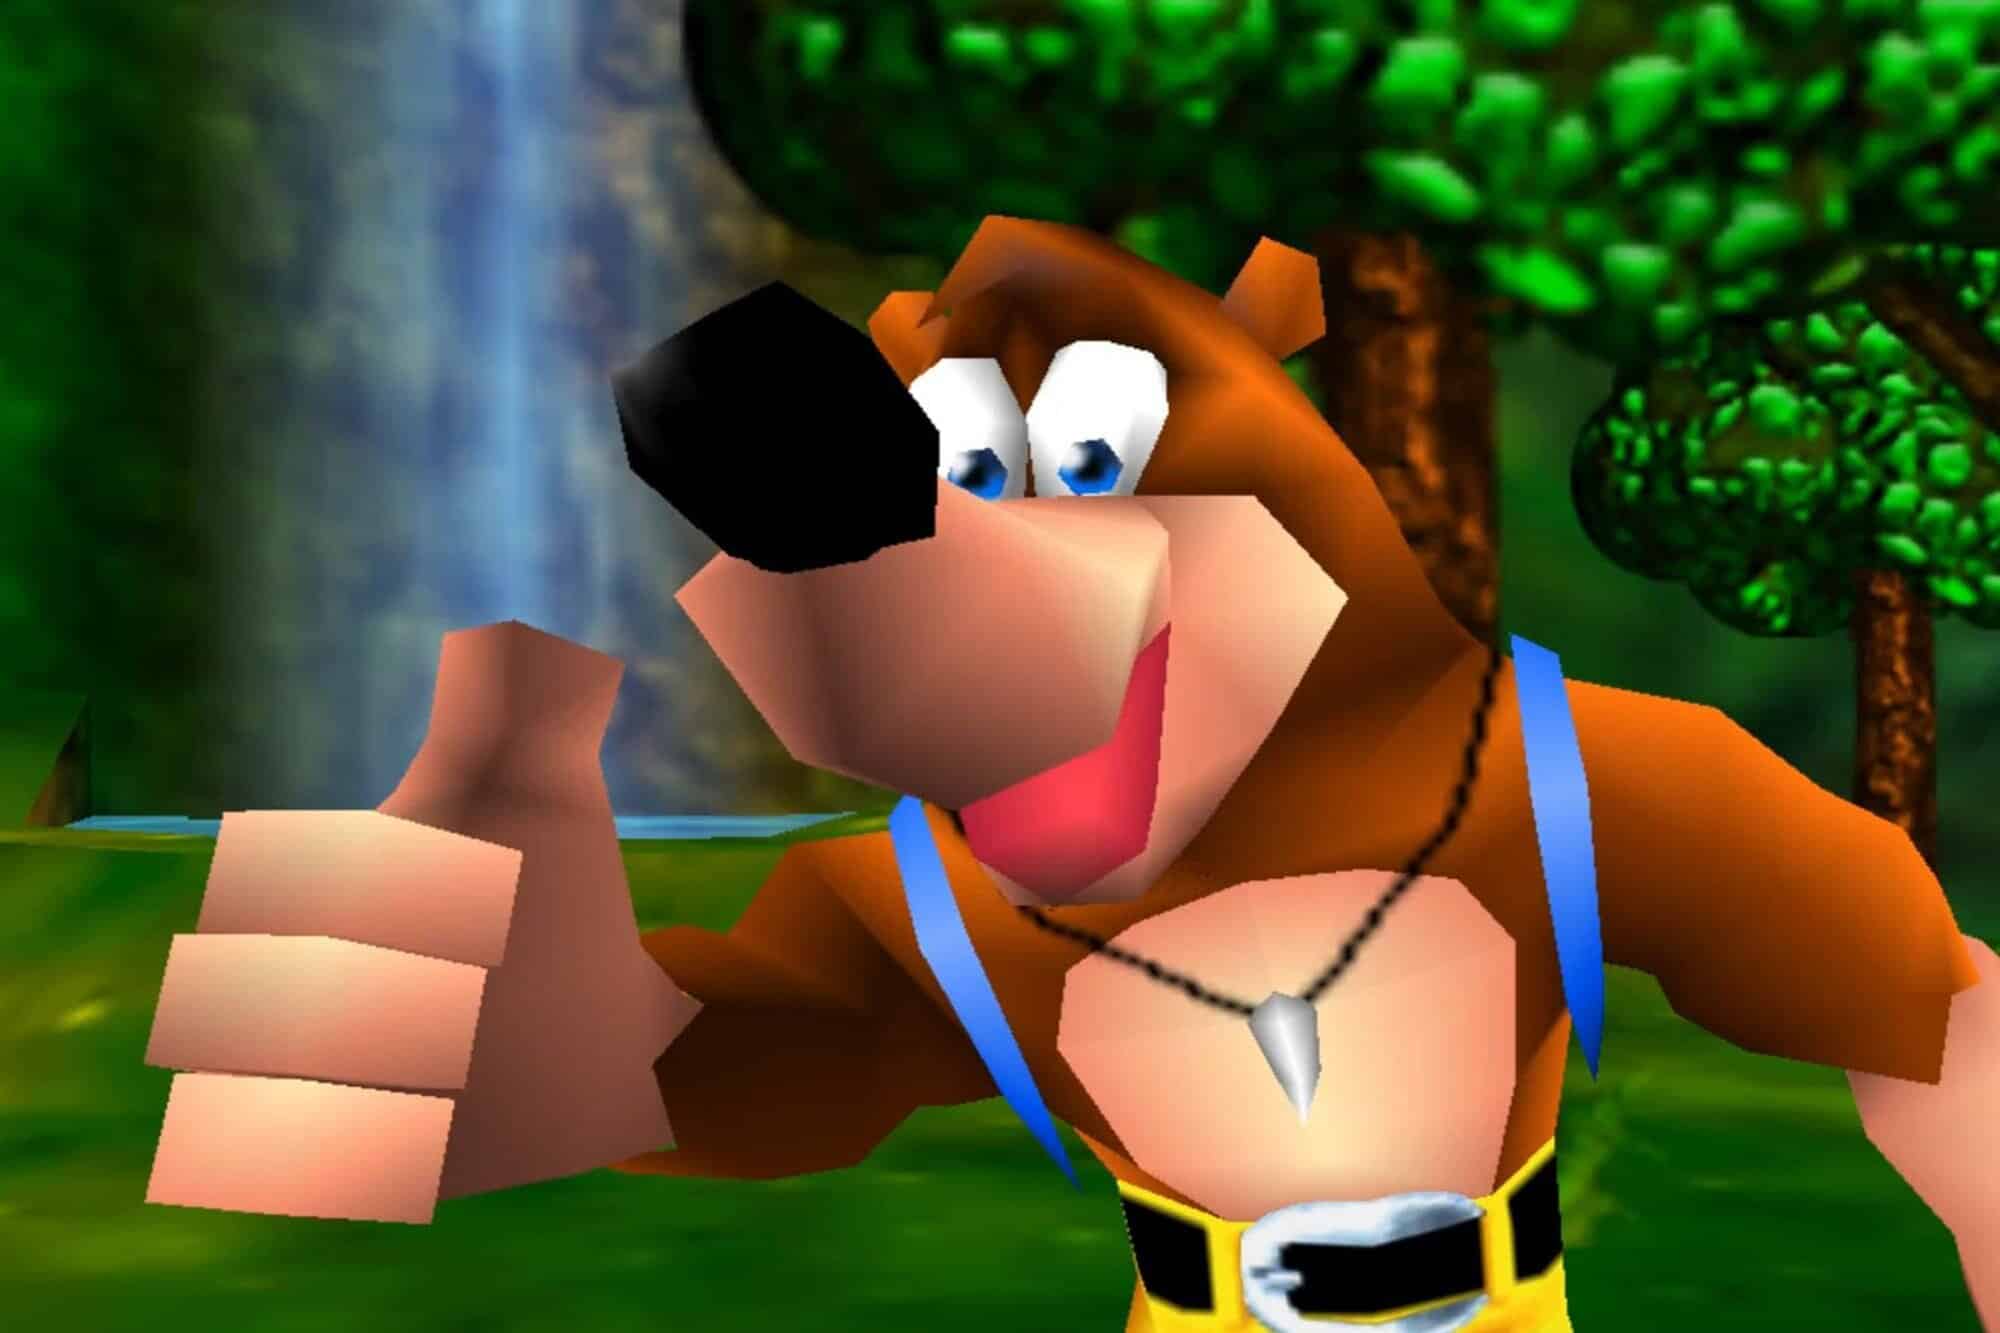 Banjo-Kazooie' hits Nintendo's Switch Online Expansion Pack on January 20